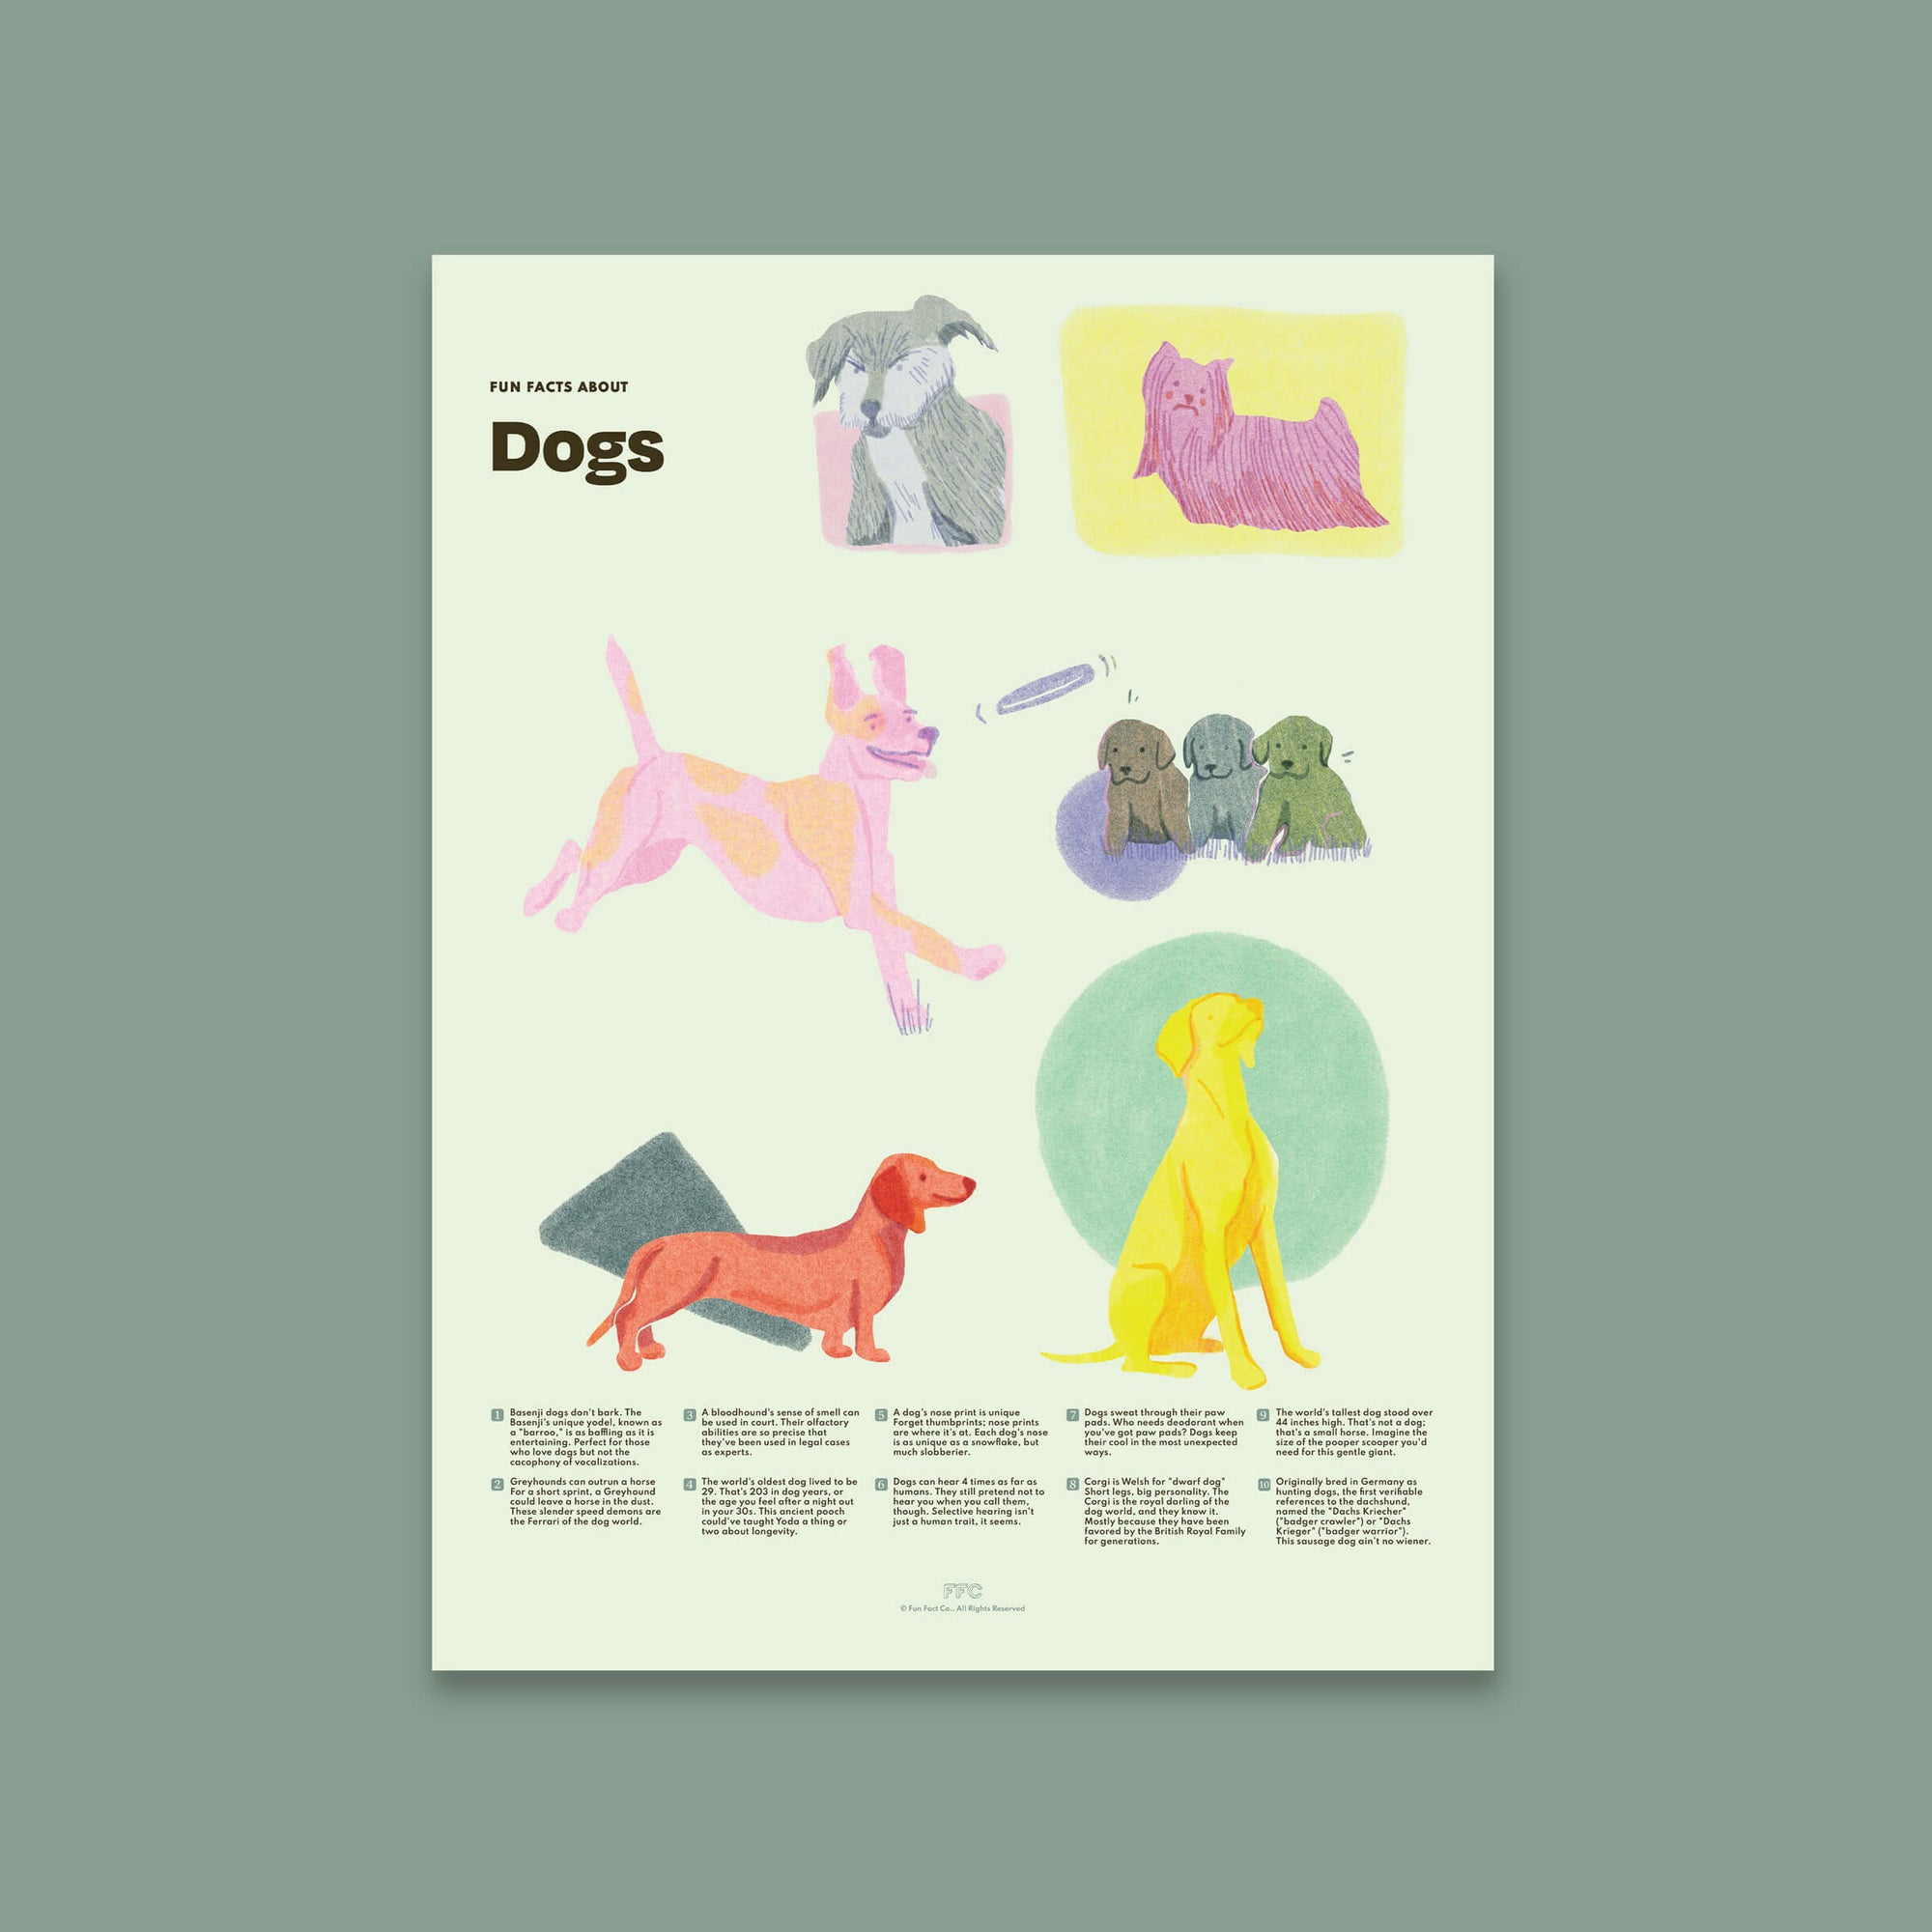 Dog Fun Facts Print, Educational Dog Poster by Fun Fact Co. - Unframed